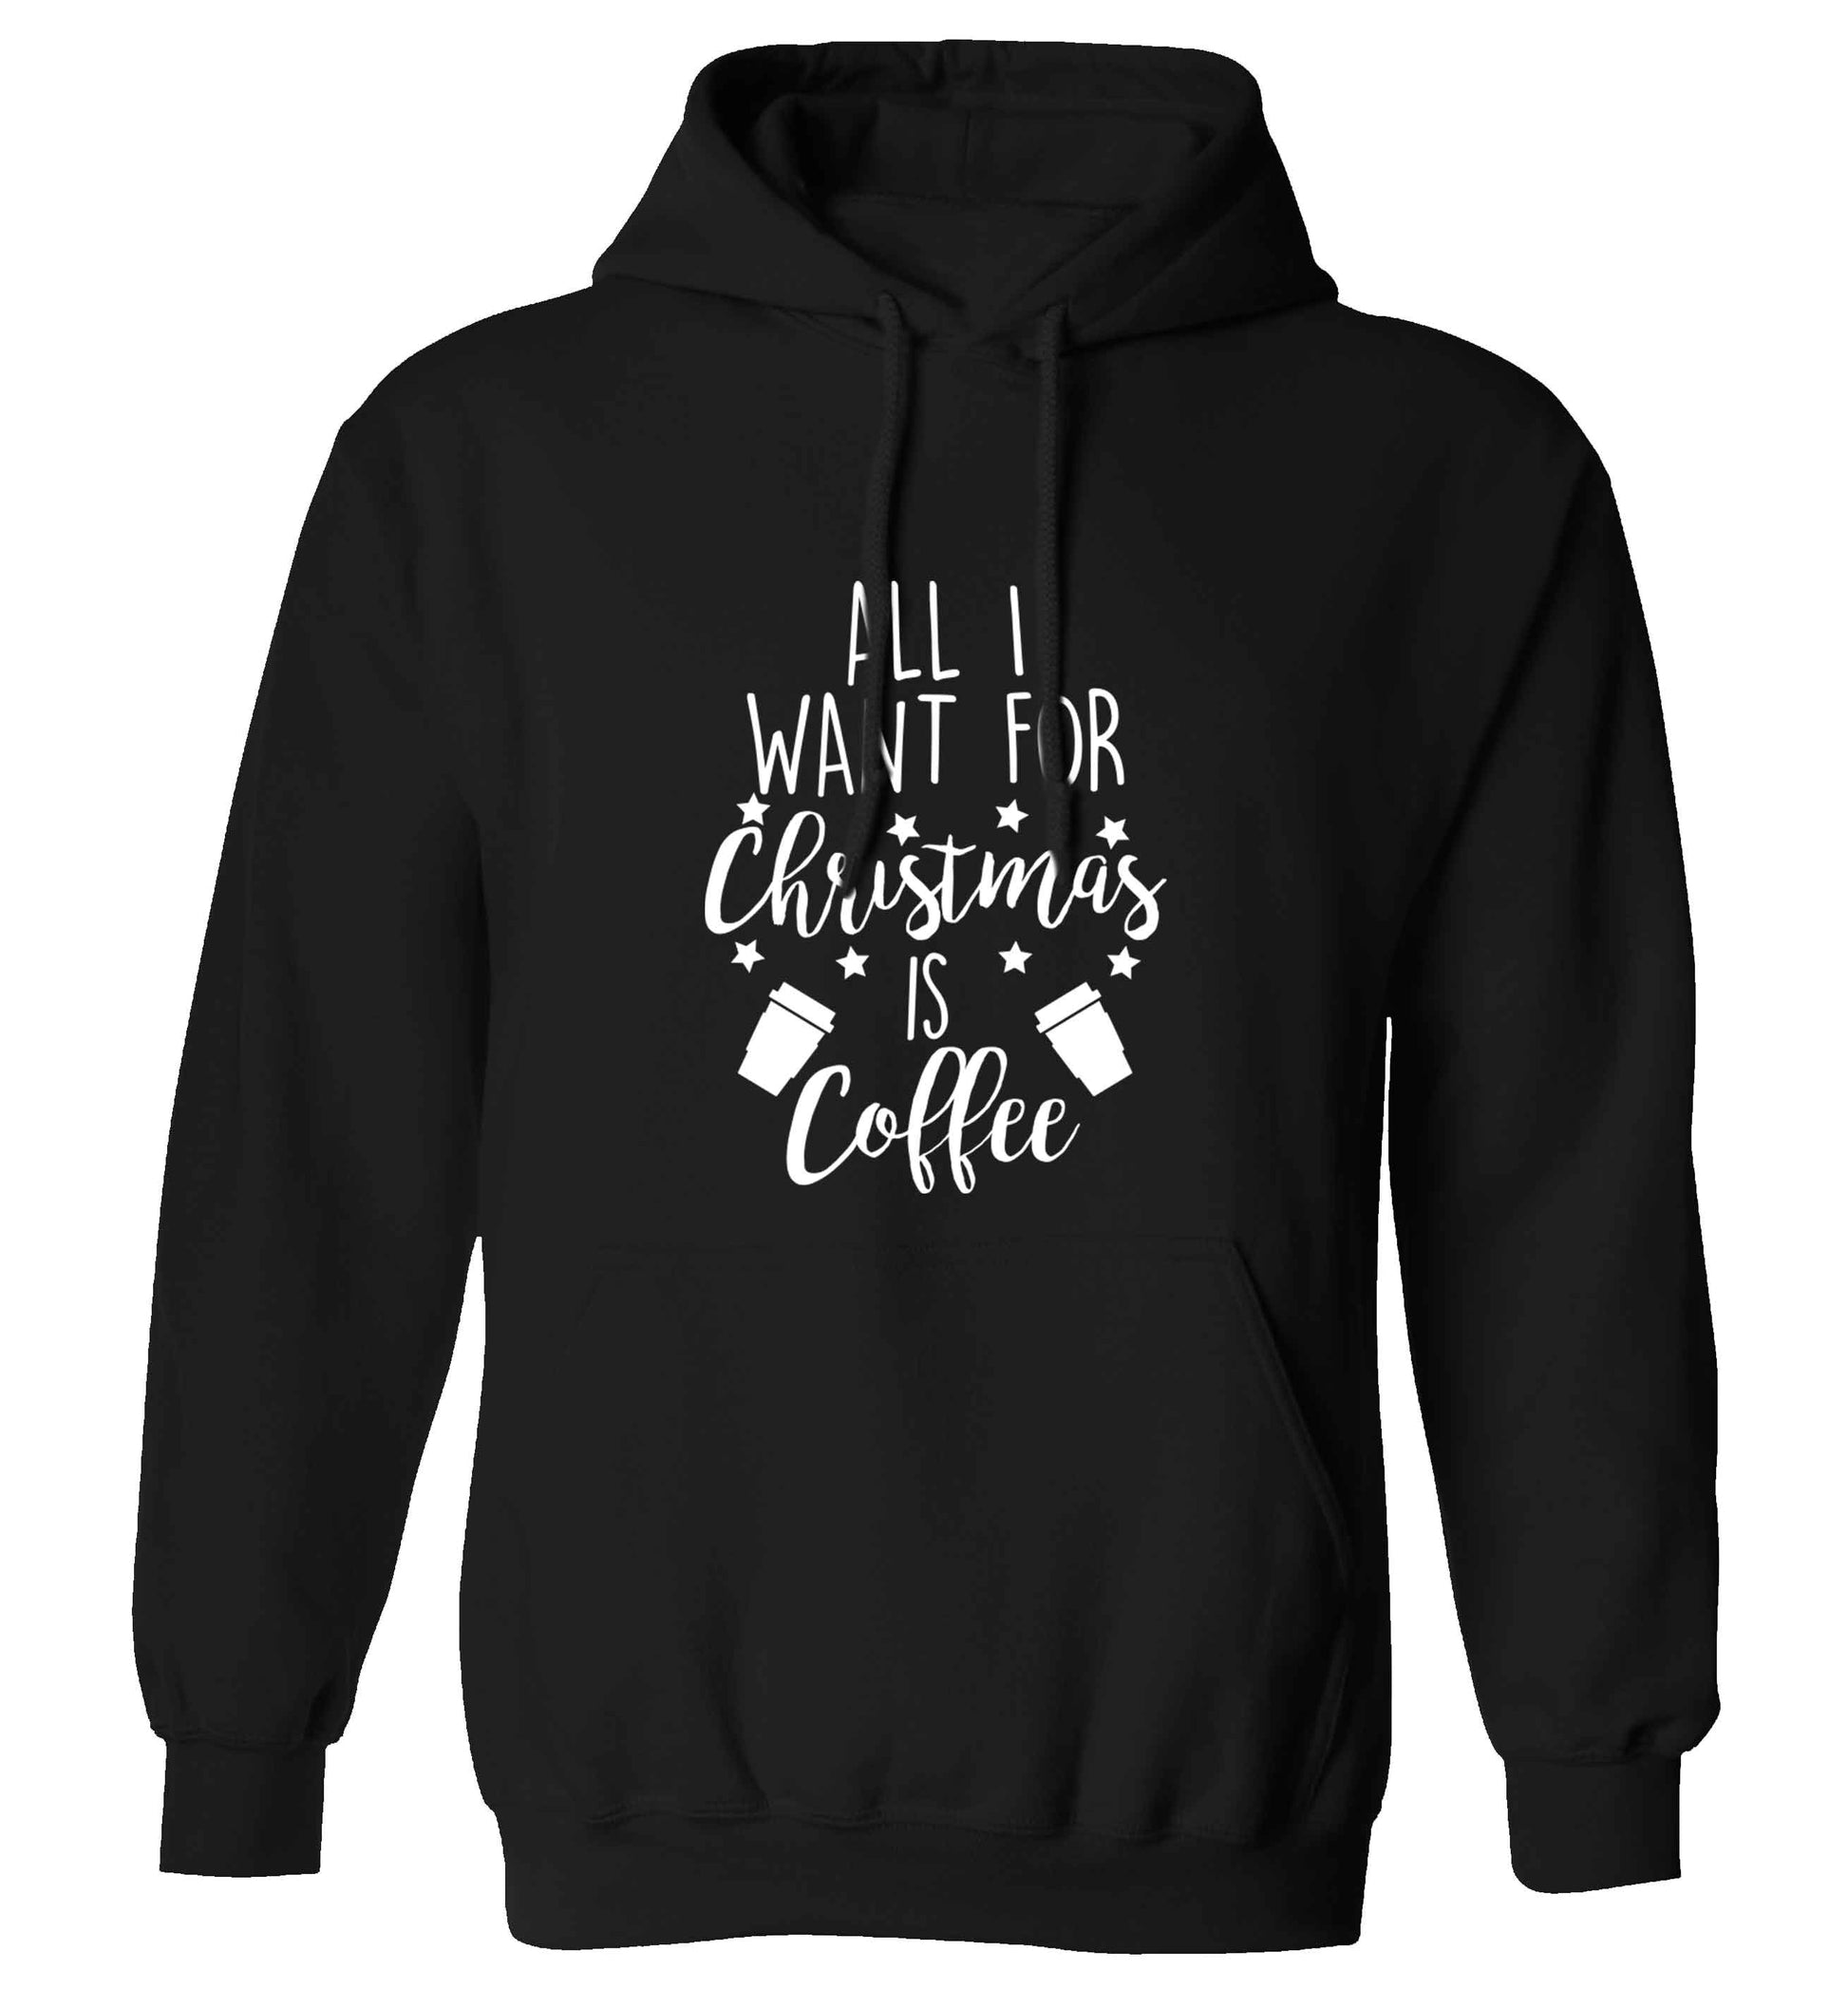 All I want for Christmas is coffee adults unisex black hoodie 2XL